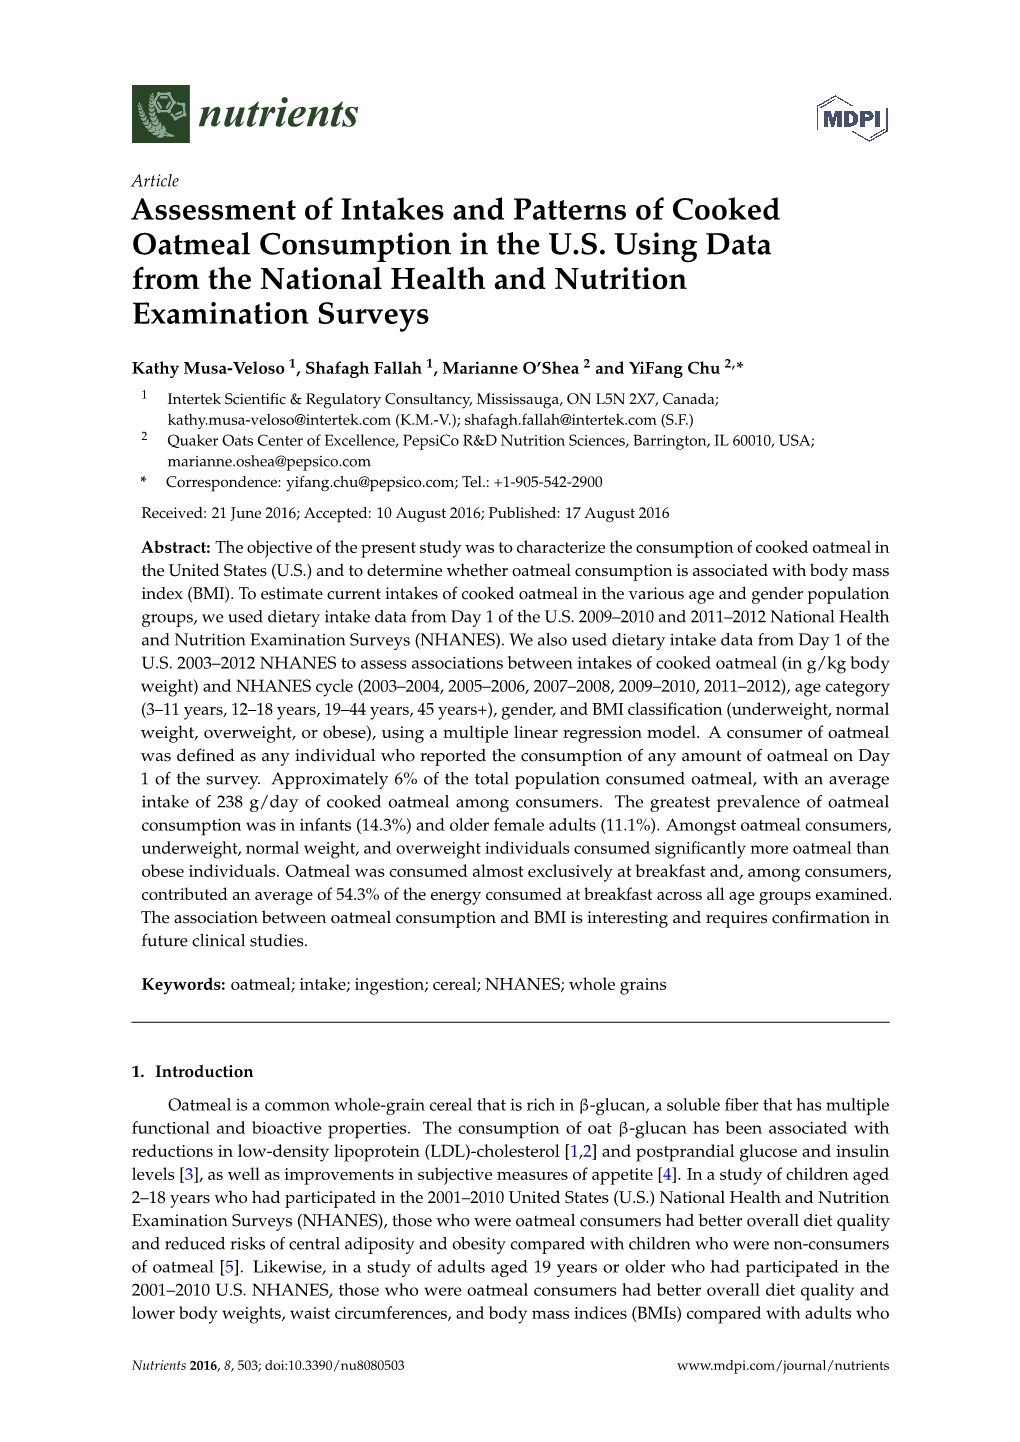 Assessment of Intakes and Patterns of Cooked Oatmeal Consumption in the U.S